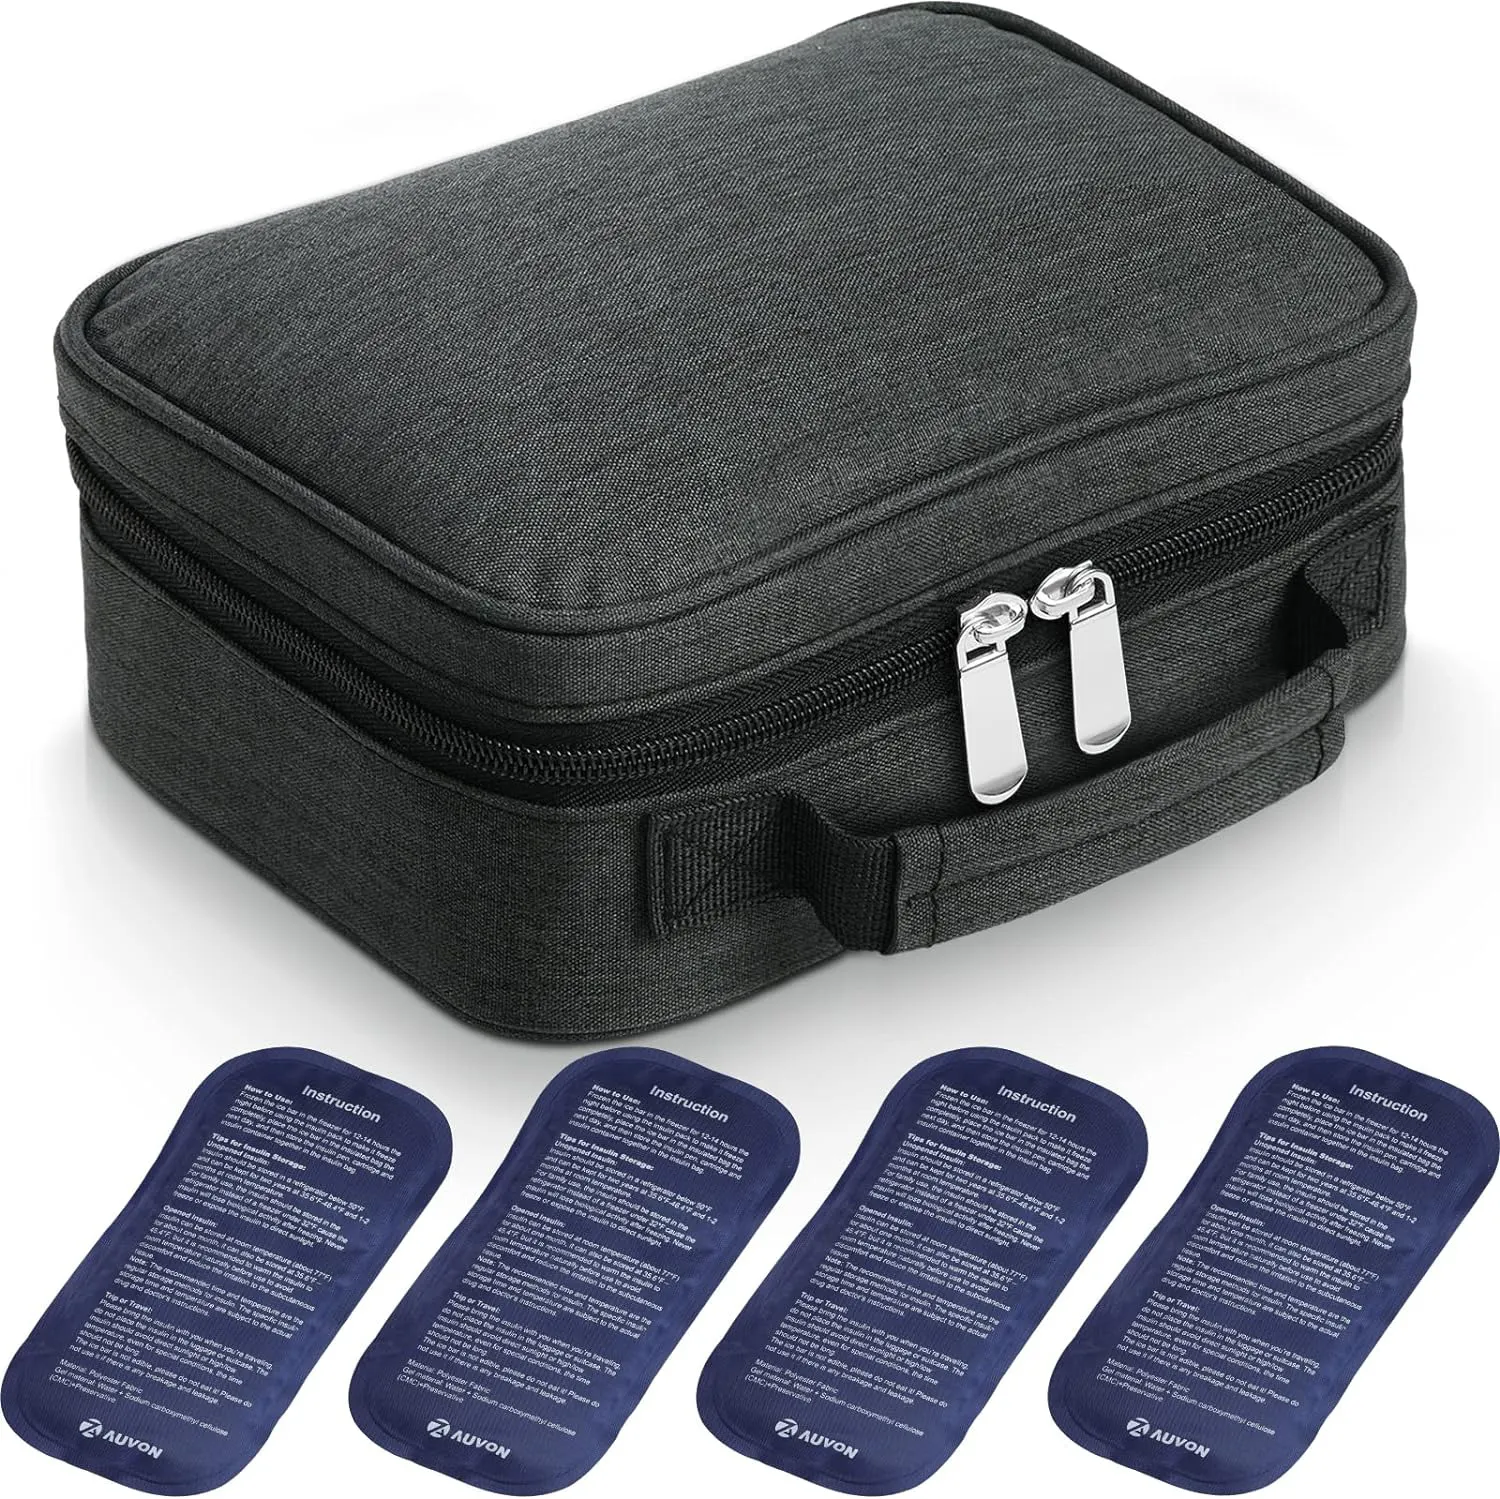 Portable Insulin Cooler Travel Case Insulated Diabetic Carry Syringe Bag with 4pcs ICE Pack for Insulin Pens and Blood Glucose